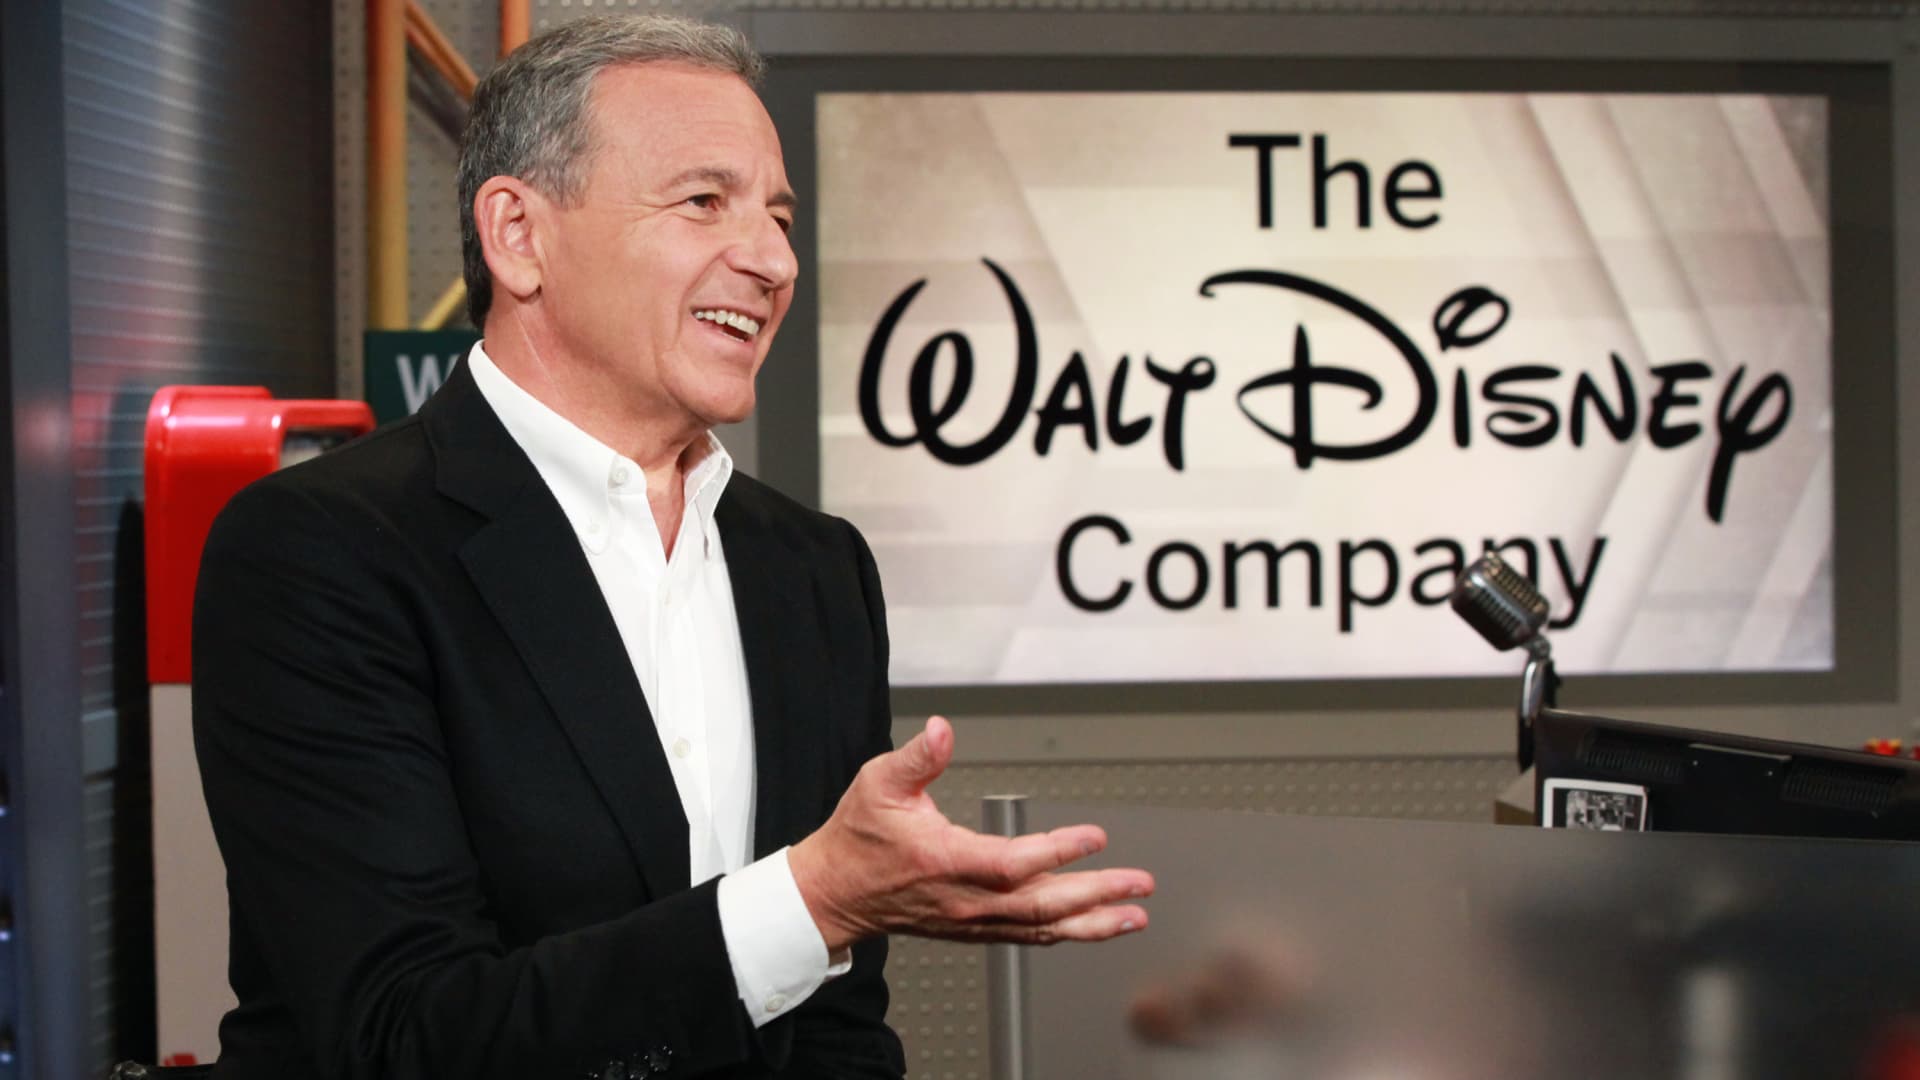 Bob Iger is back. He’s the steady hand that Disney needs as CEO to get it back on track